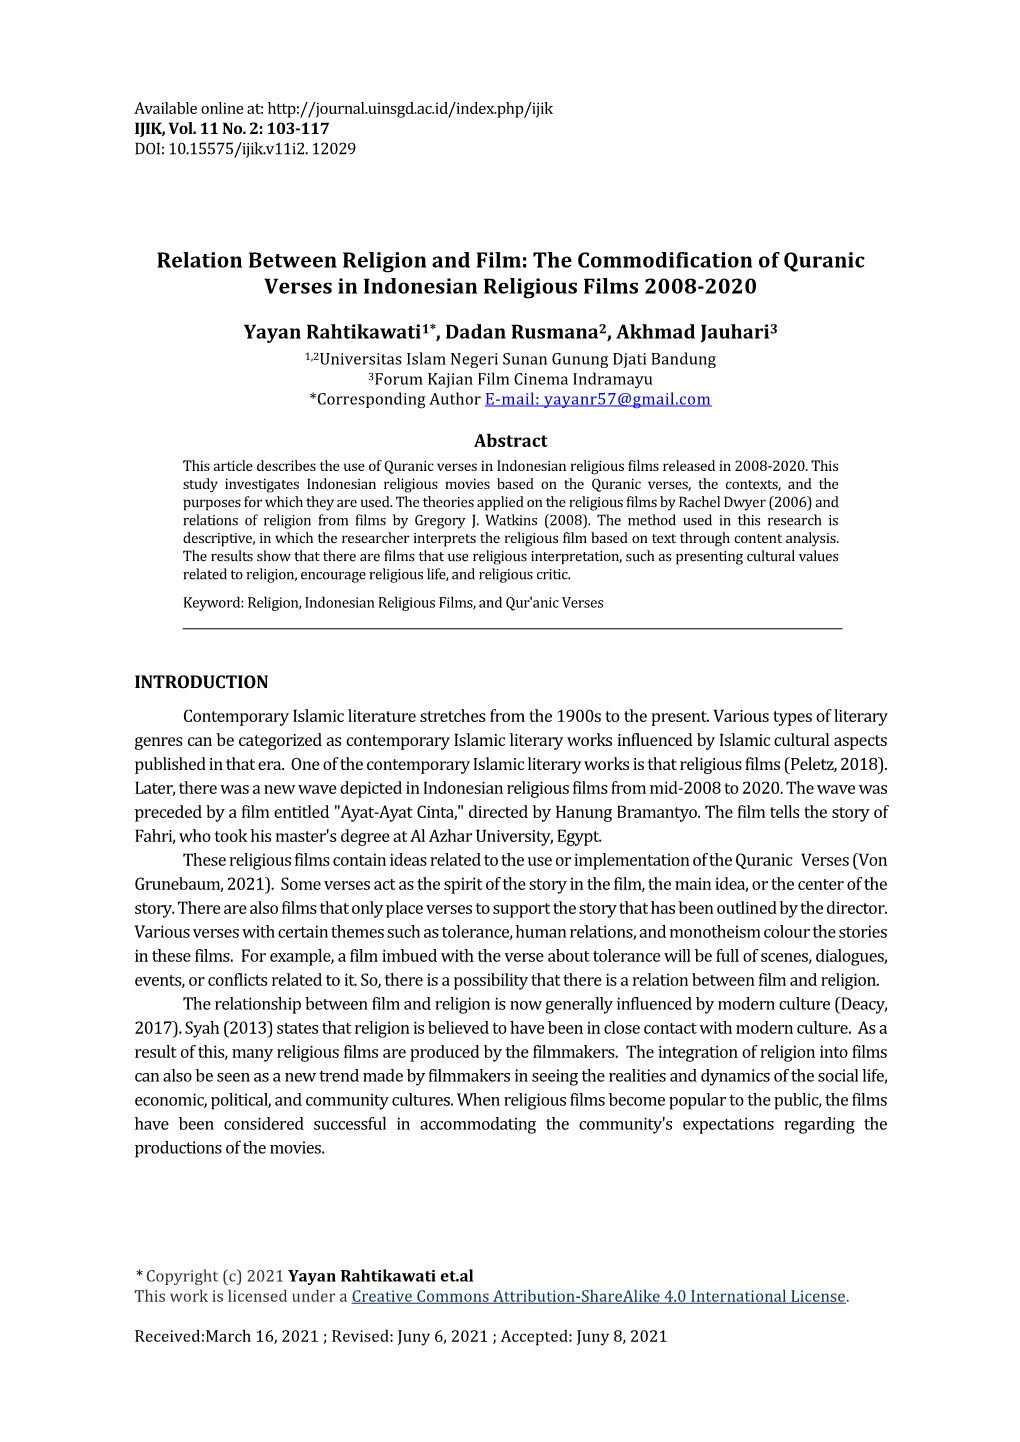 The Commodification of Quranic Verses in Indonesian Religious Films 2008-2020